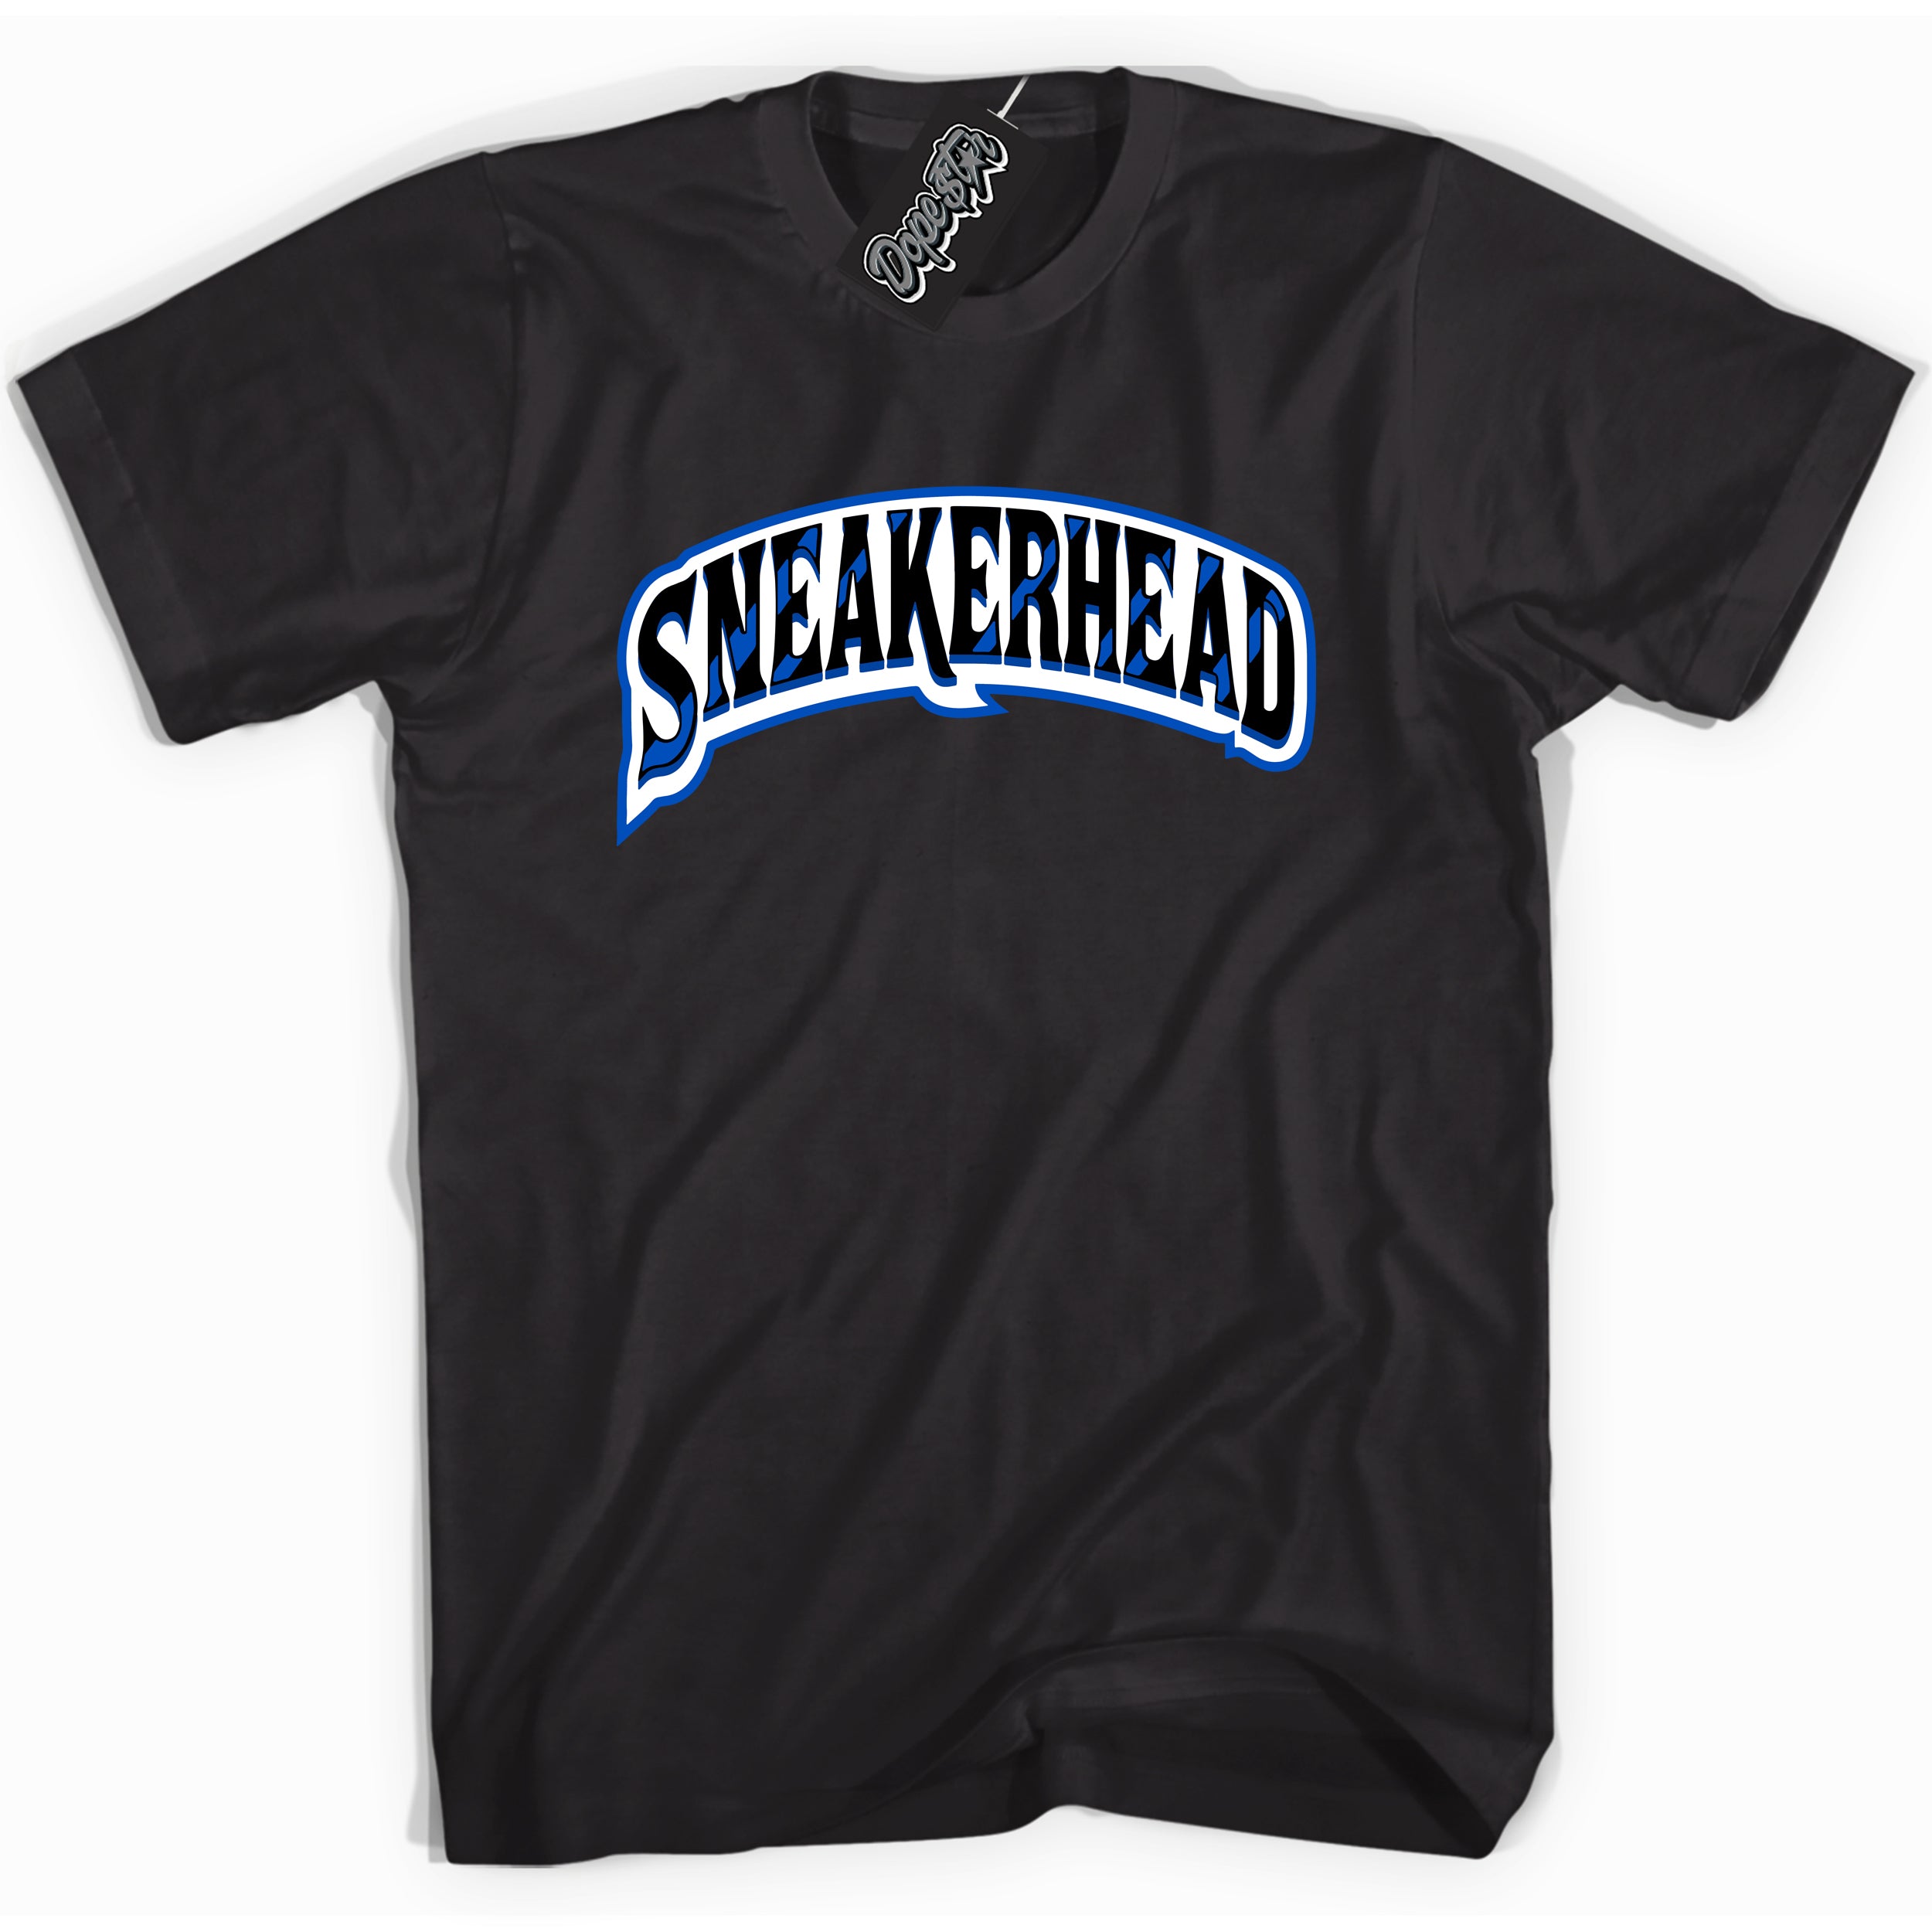 Cool Black graphic tee with Sneakerhead print, that perfectly matches OG Royal Reimagined 1s sneakers 